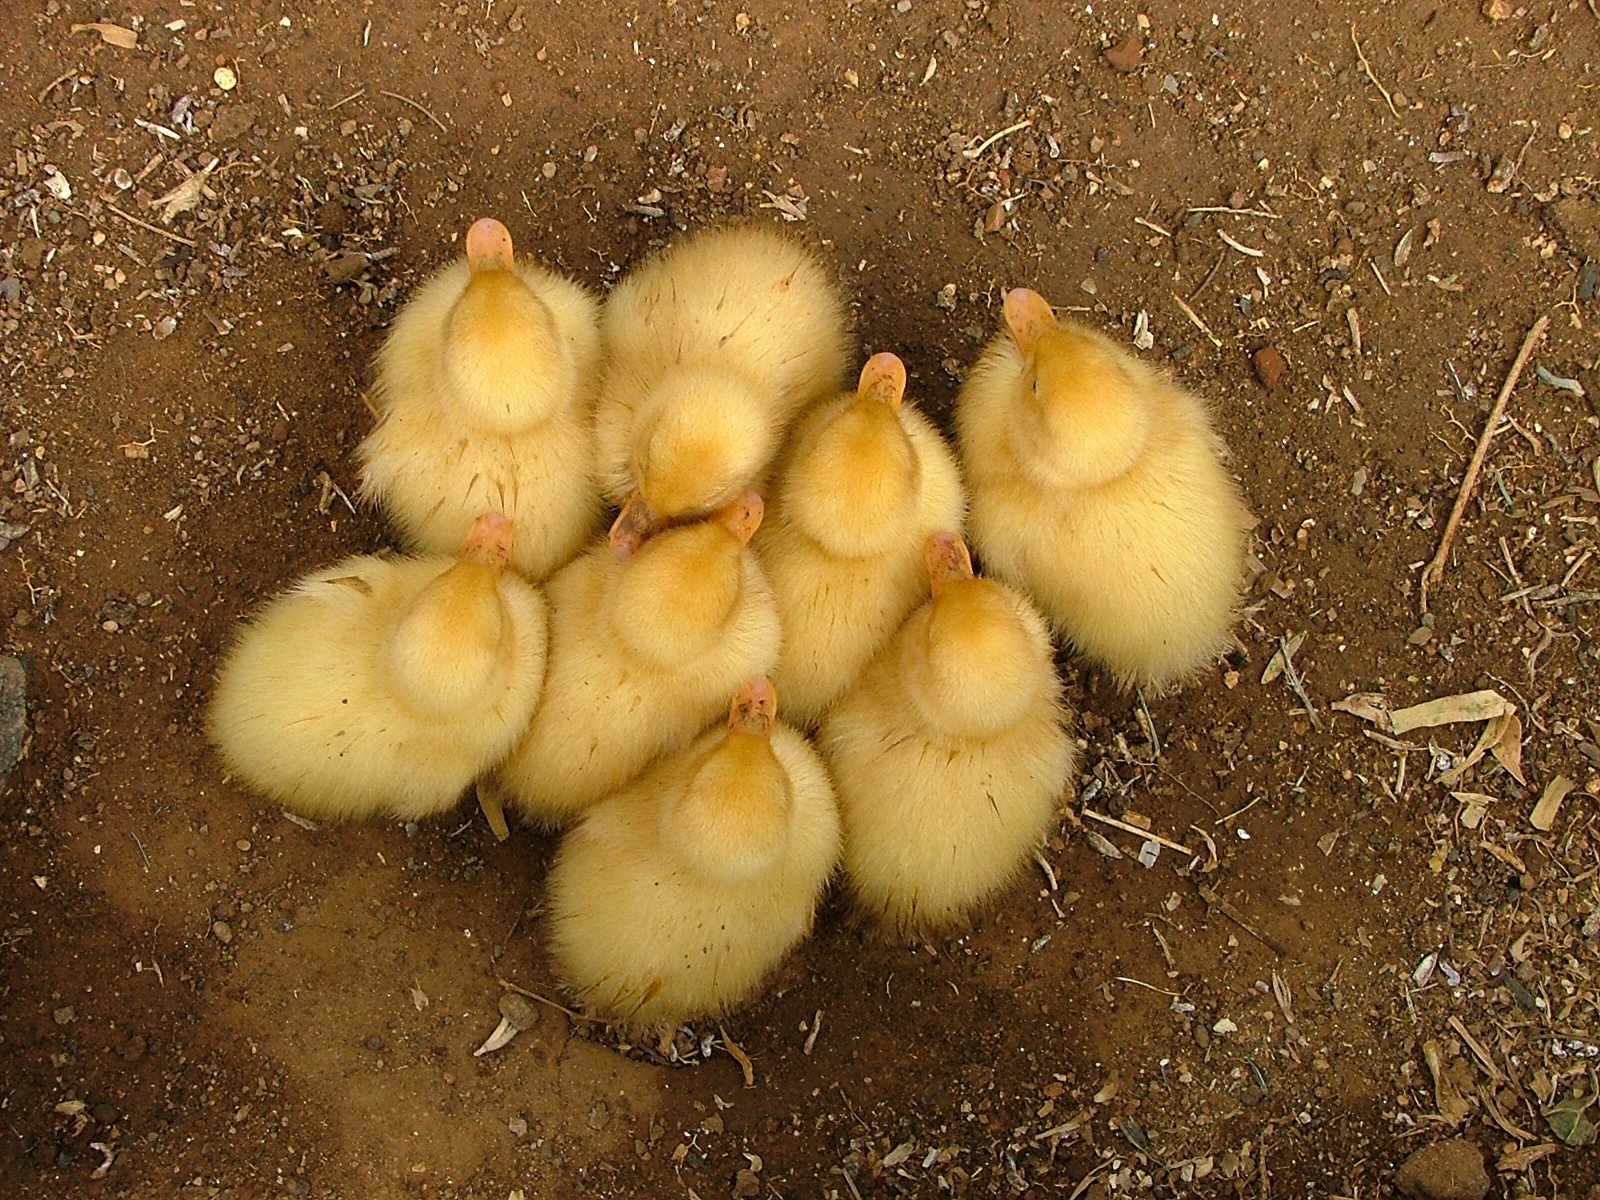 small yellow chicks sitting in the dirt